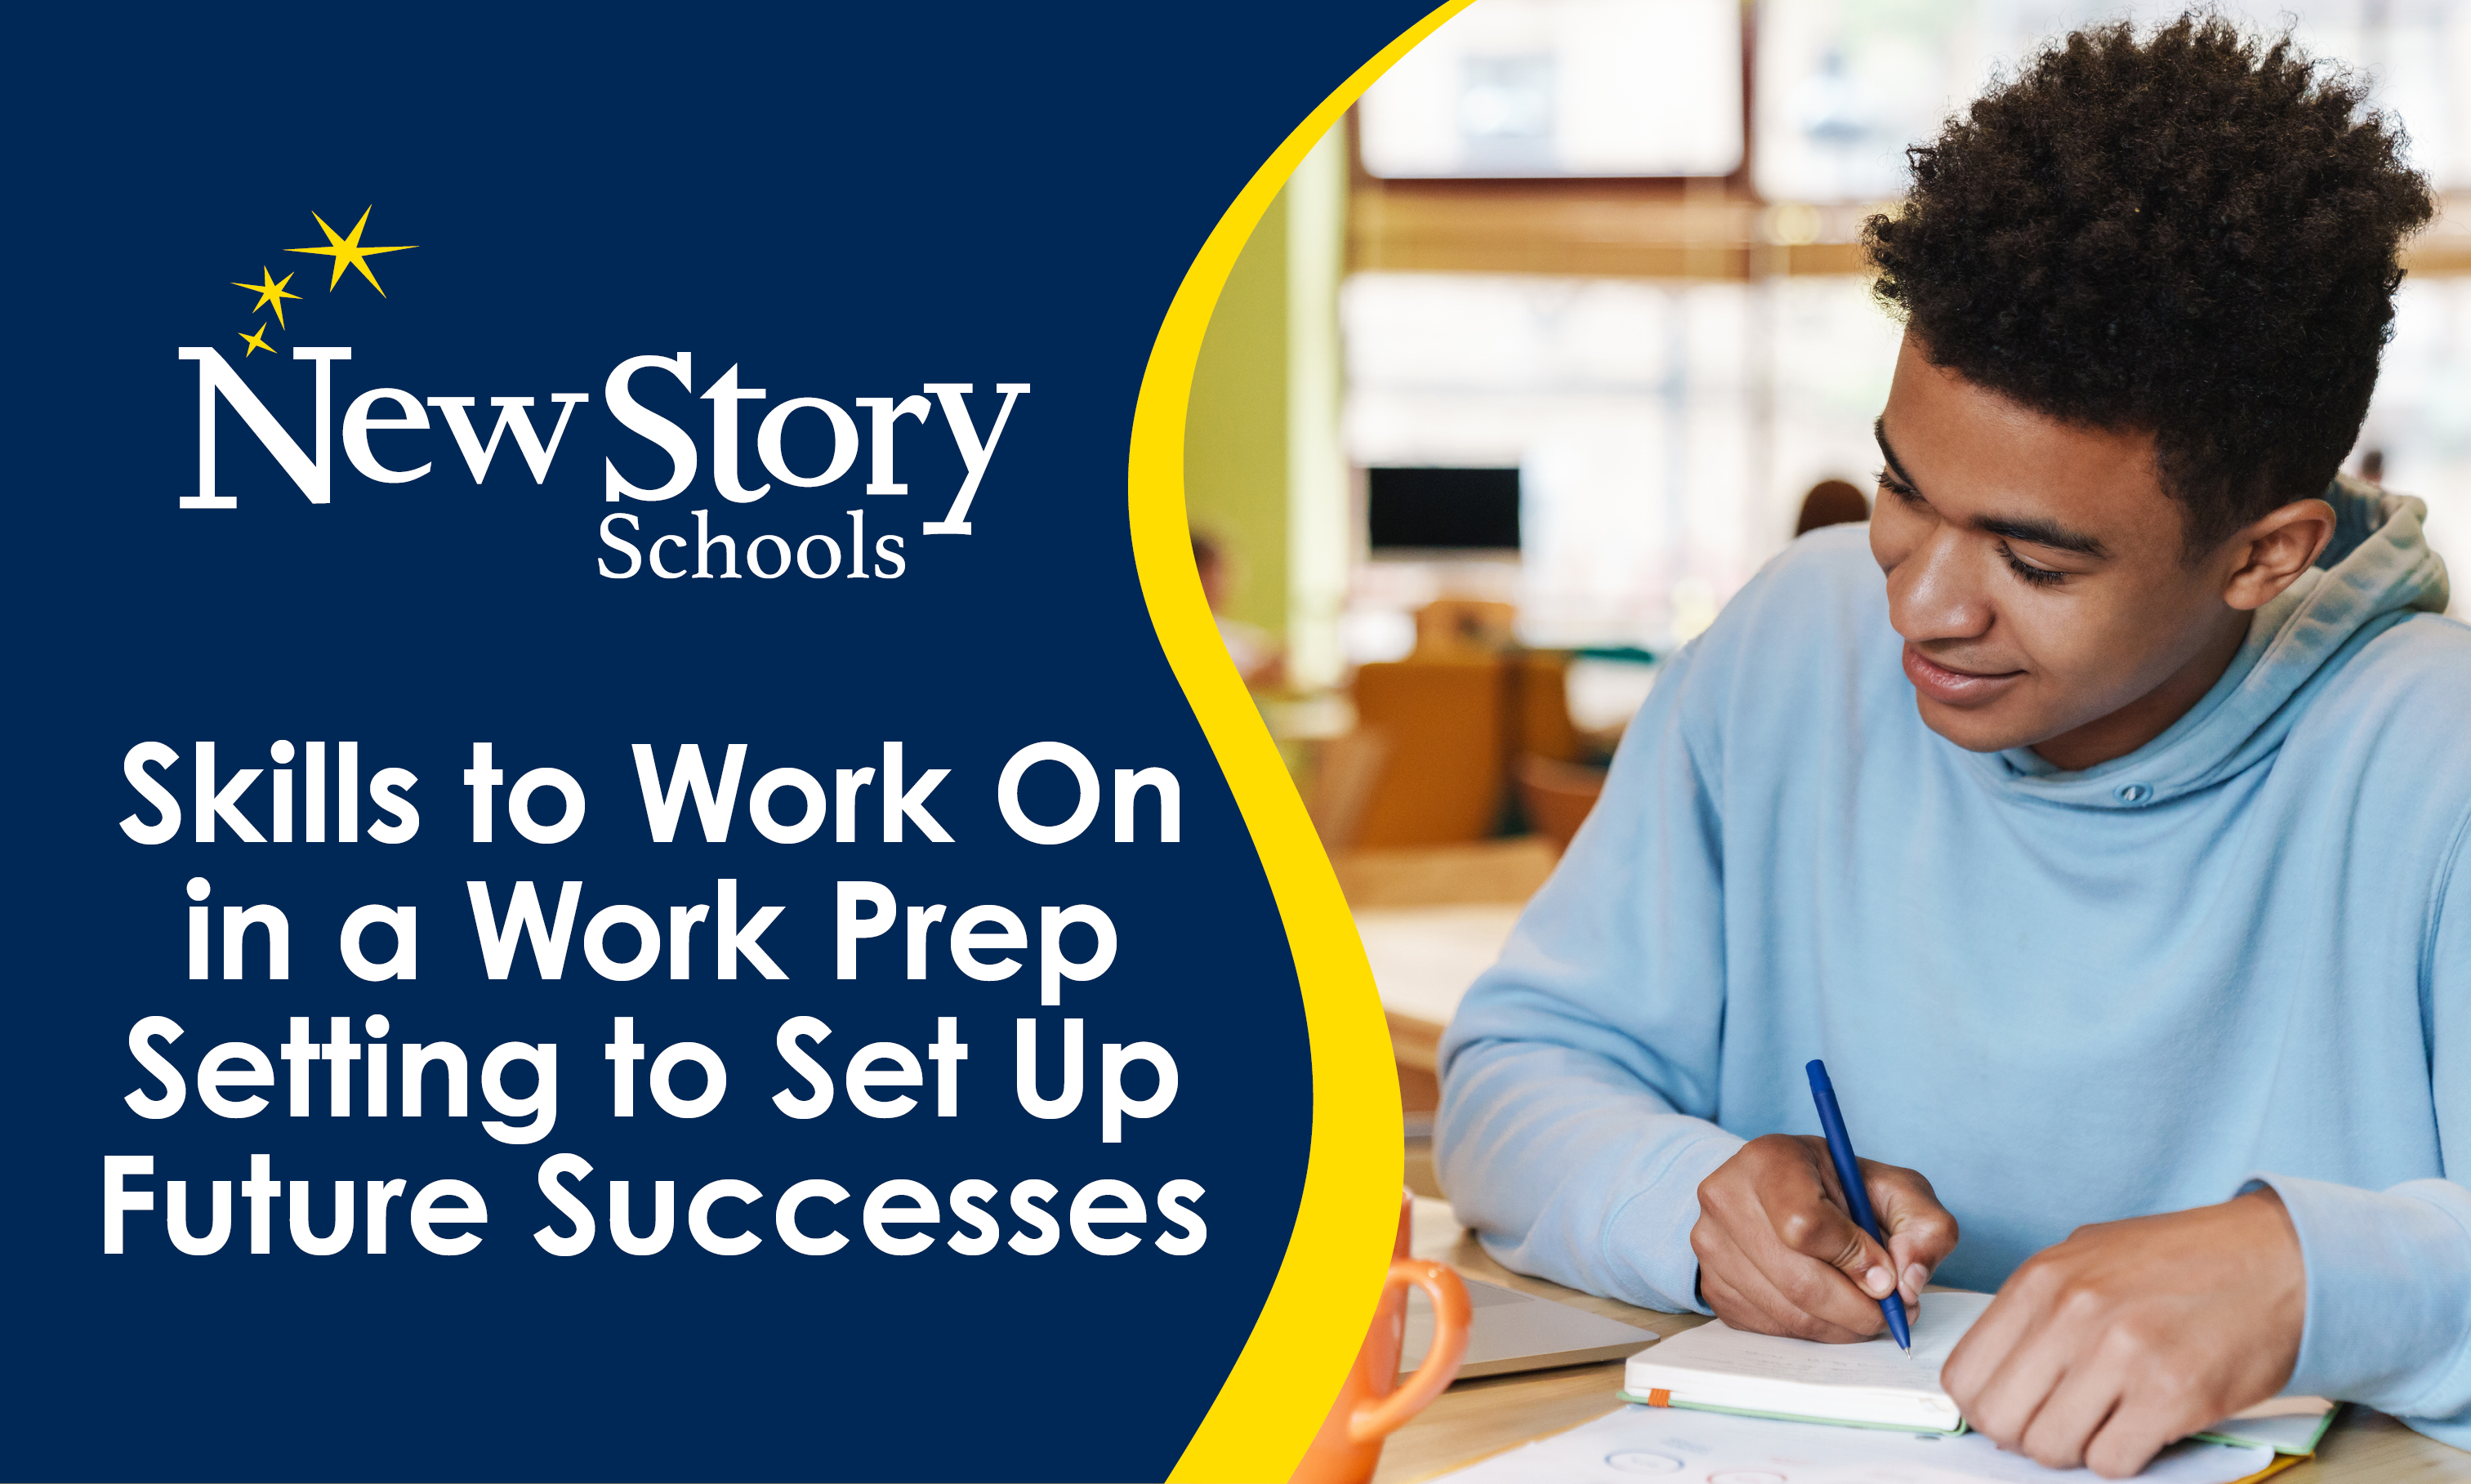 Skills to work on in a work prep setting to set up future successes